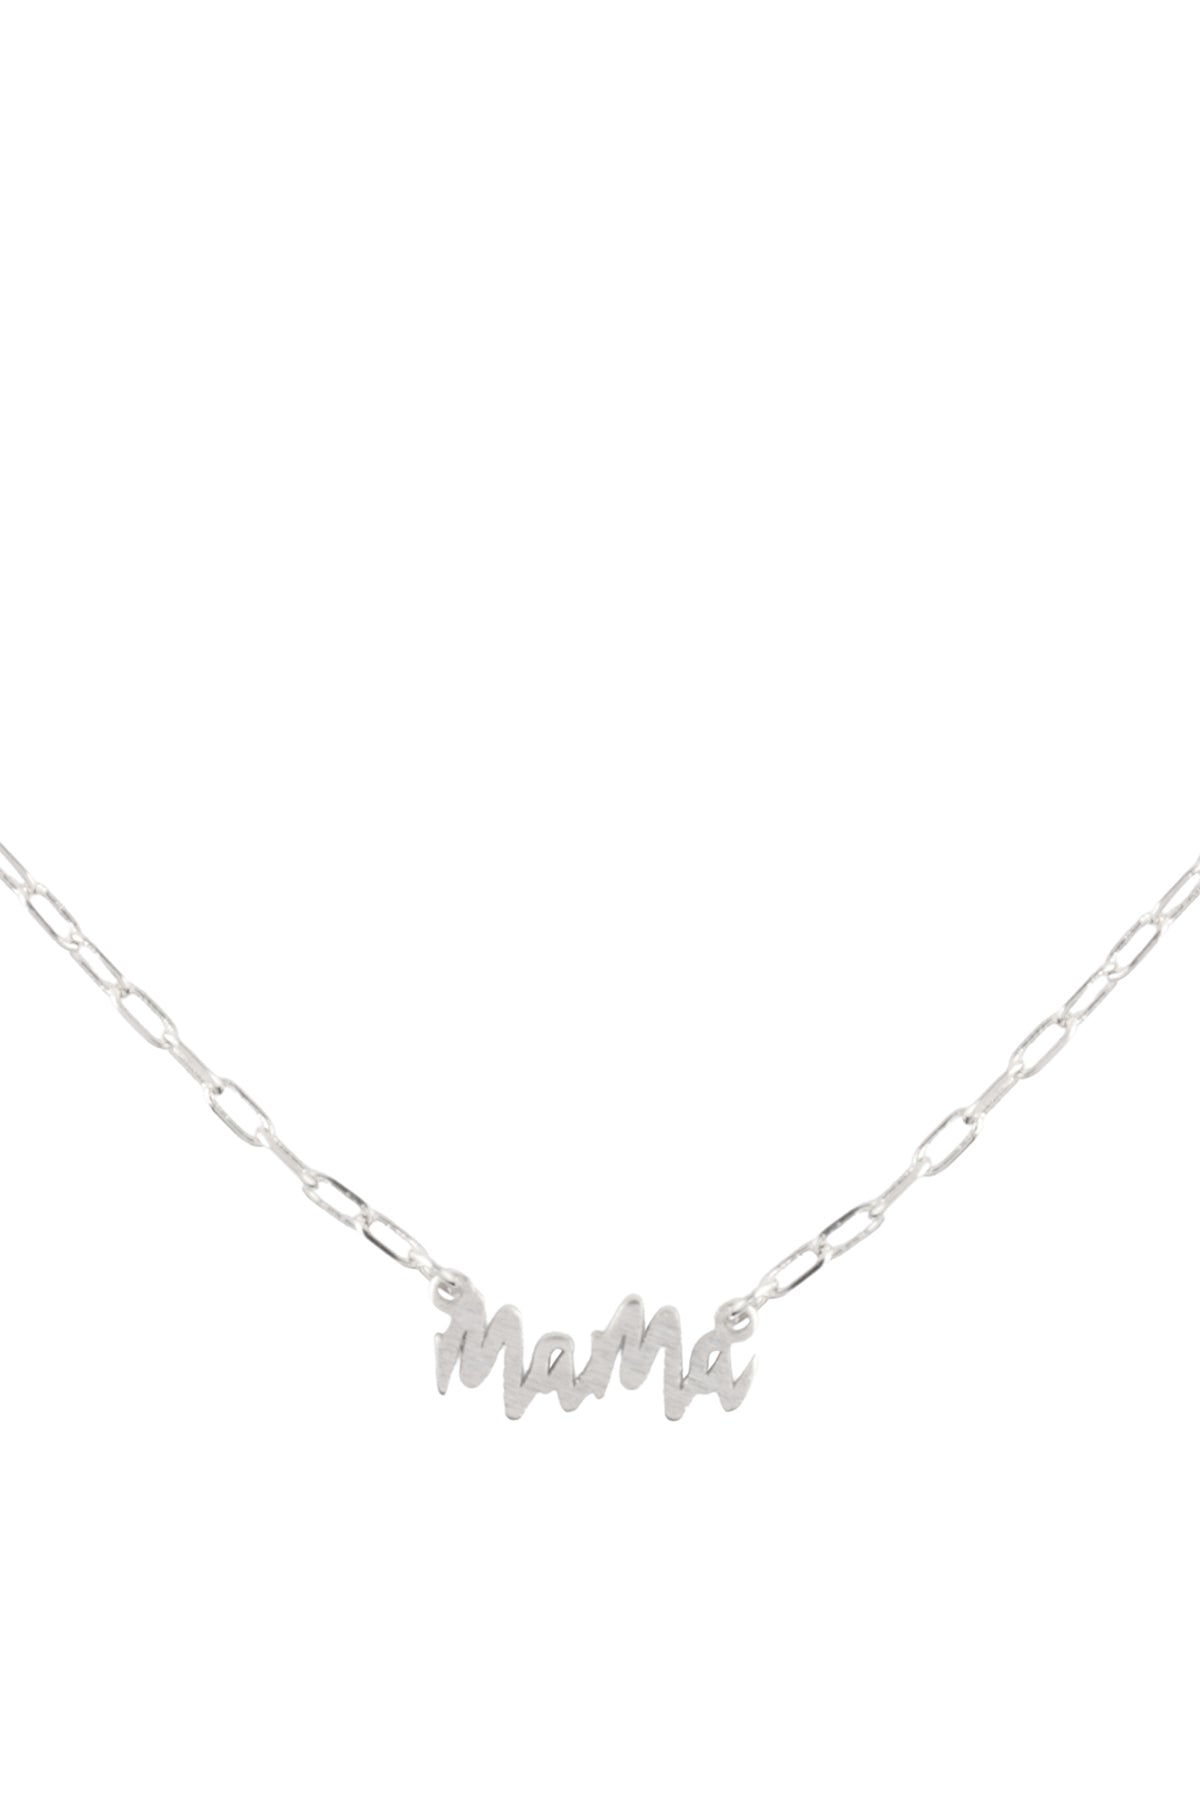 "MAMA" PERSONALIZE LETTER PENDANT BRASS CHAIN NECKLACE